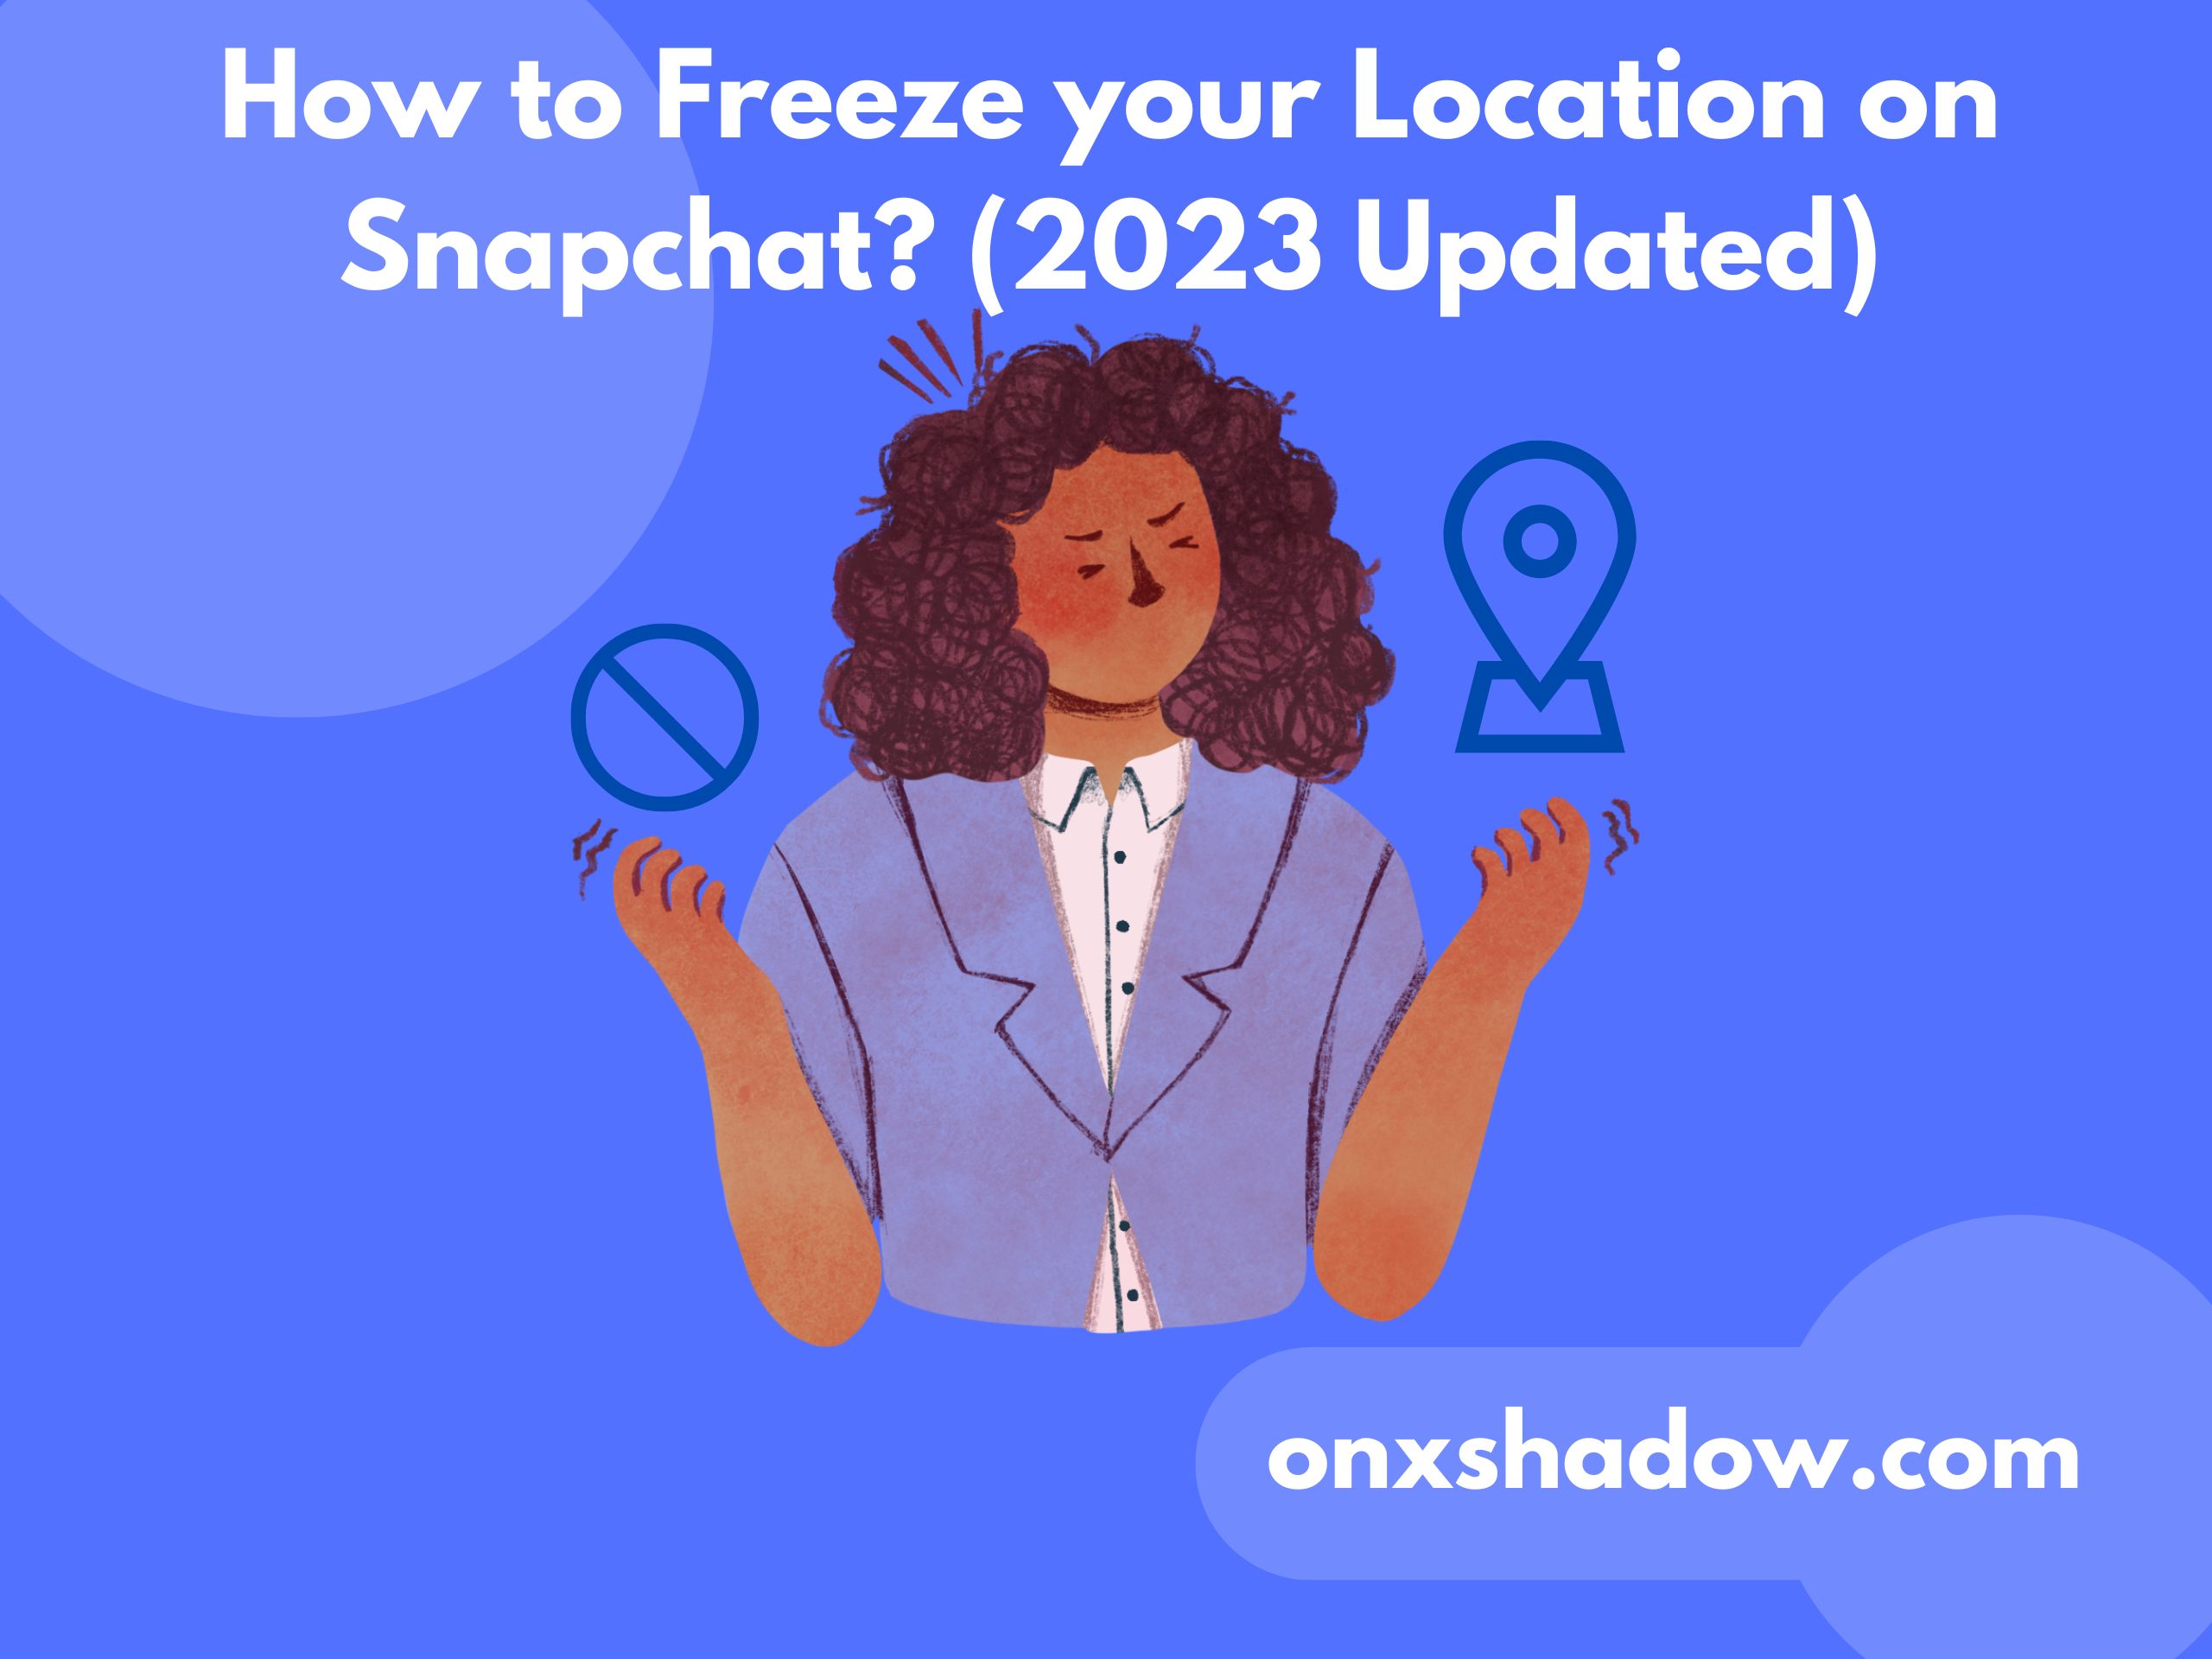 How to Freeze your Location on Snapchat? (2023 Updated)